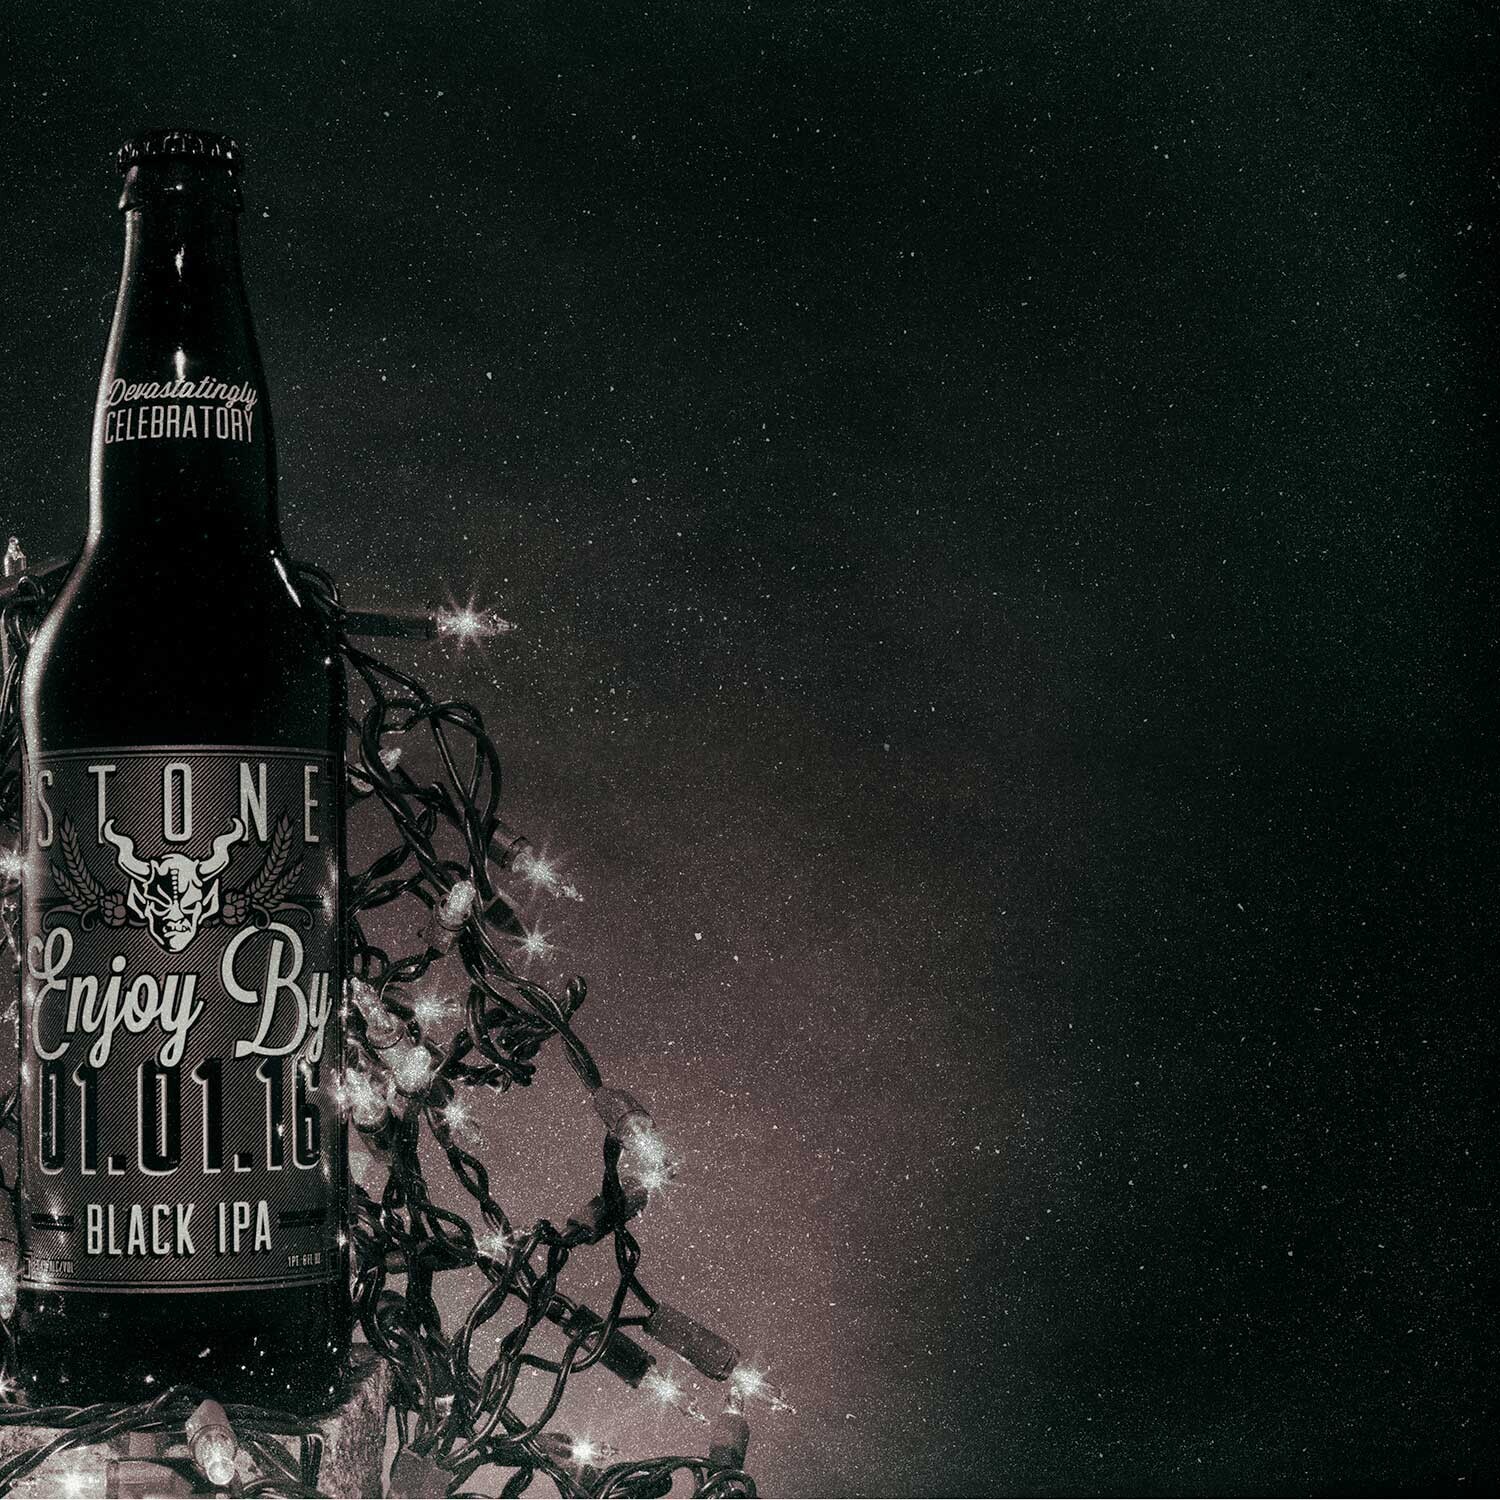 Stone Enjoy By 01.01.16 Black IPA bottle with lights in a starry sky